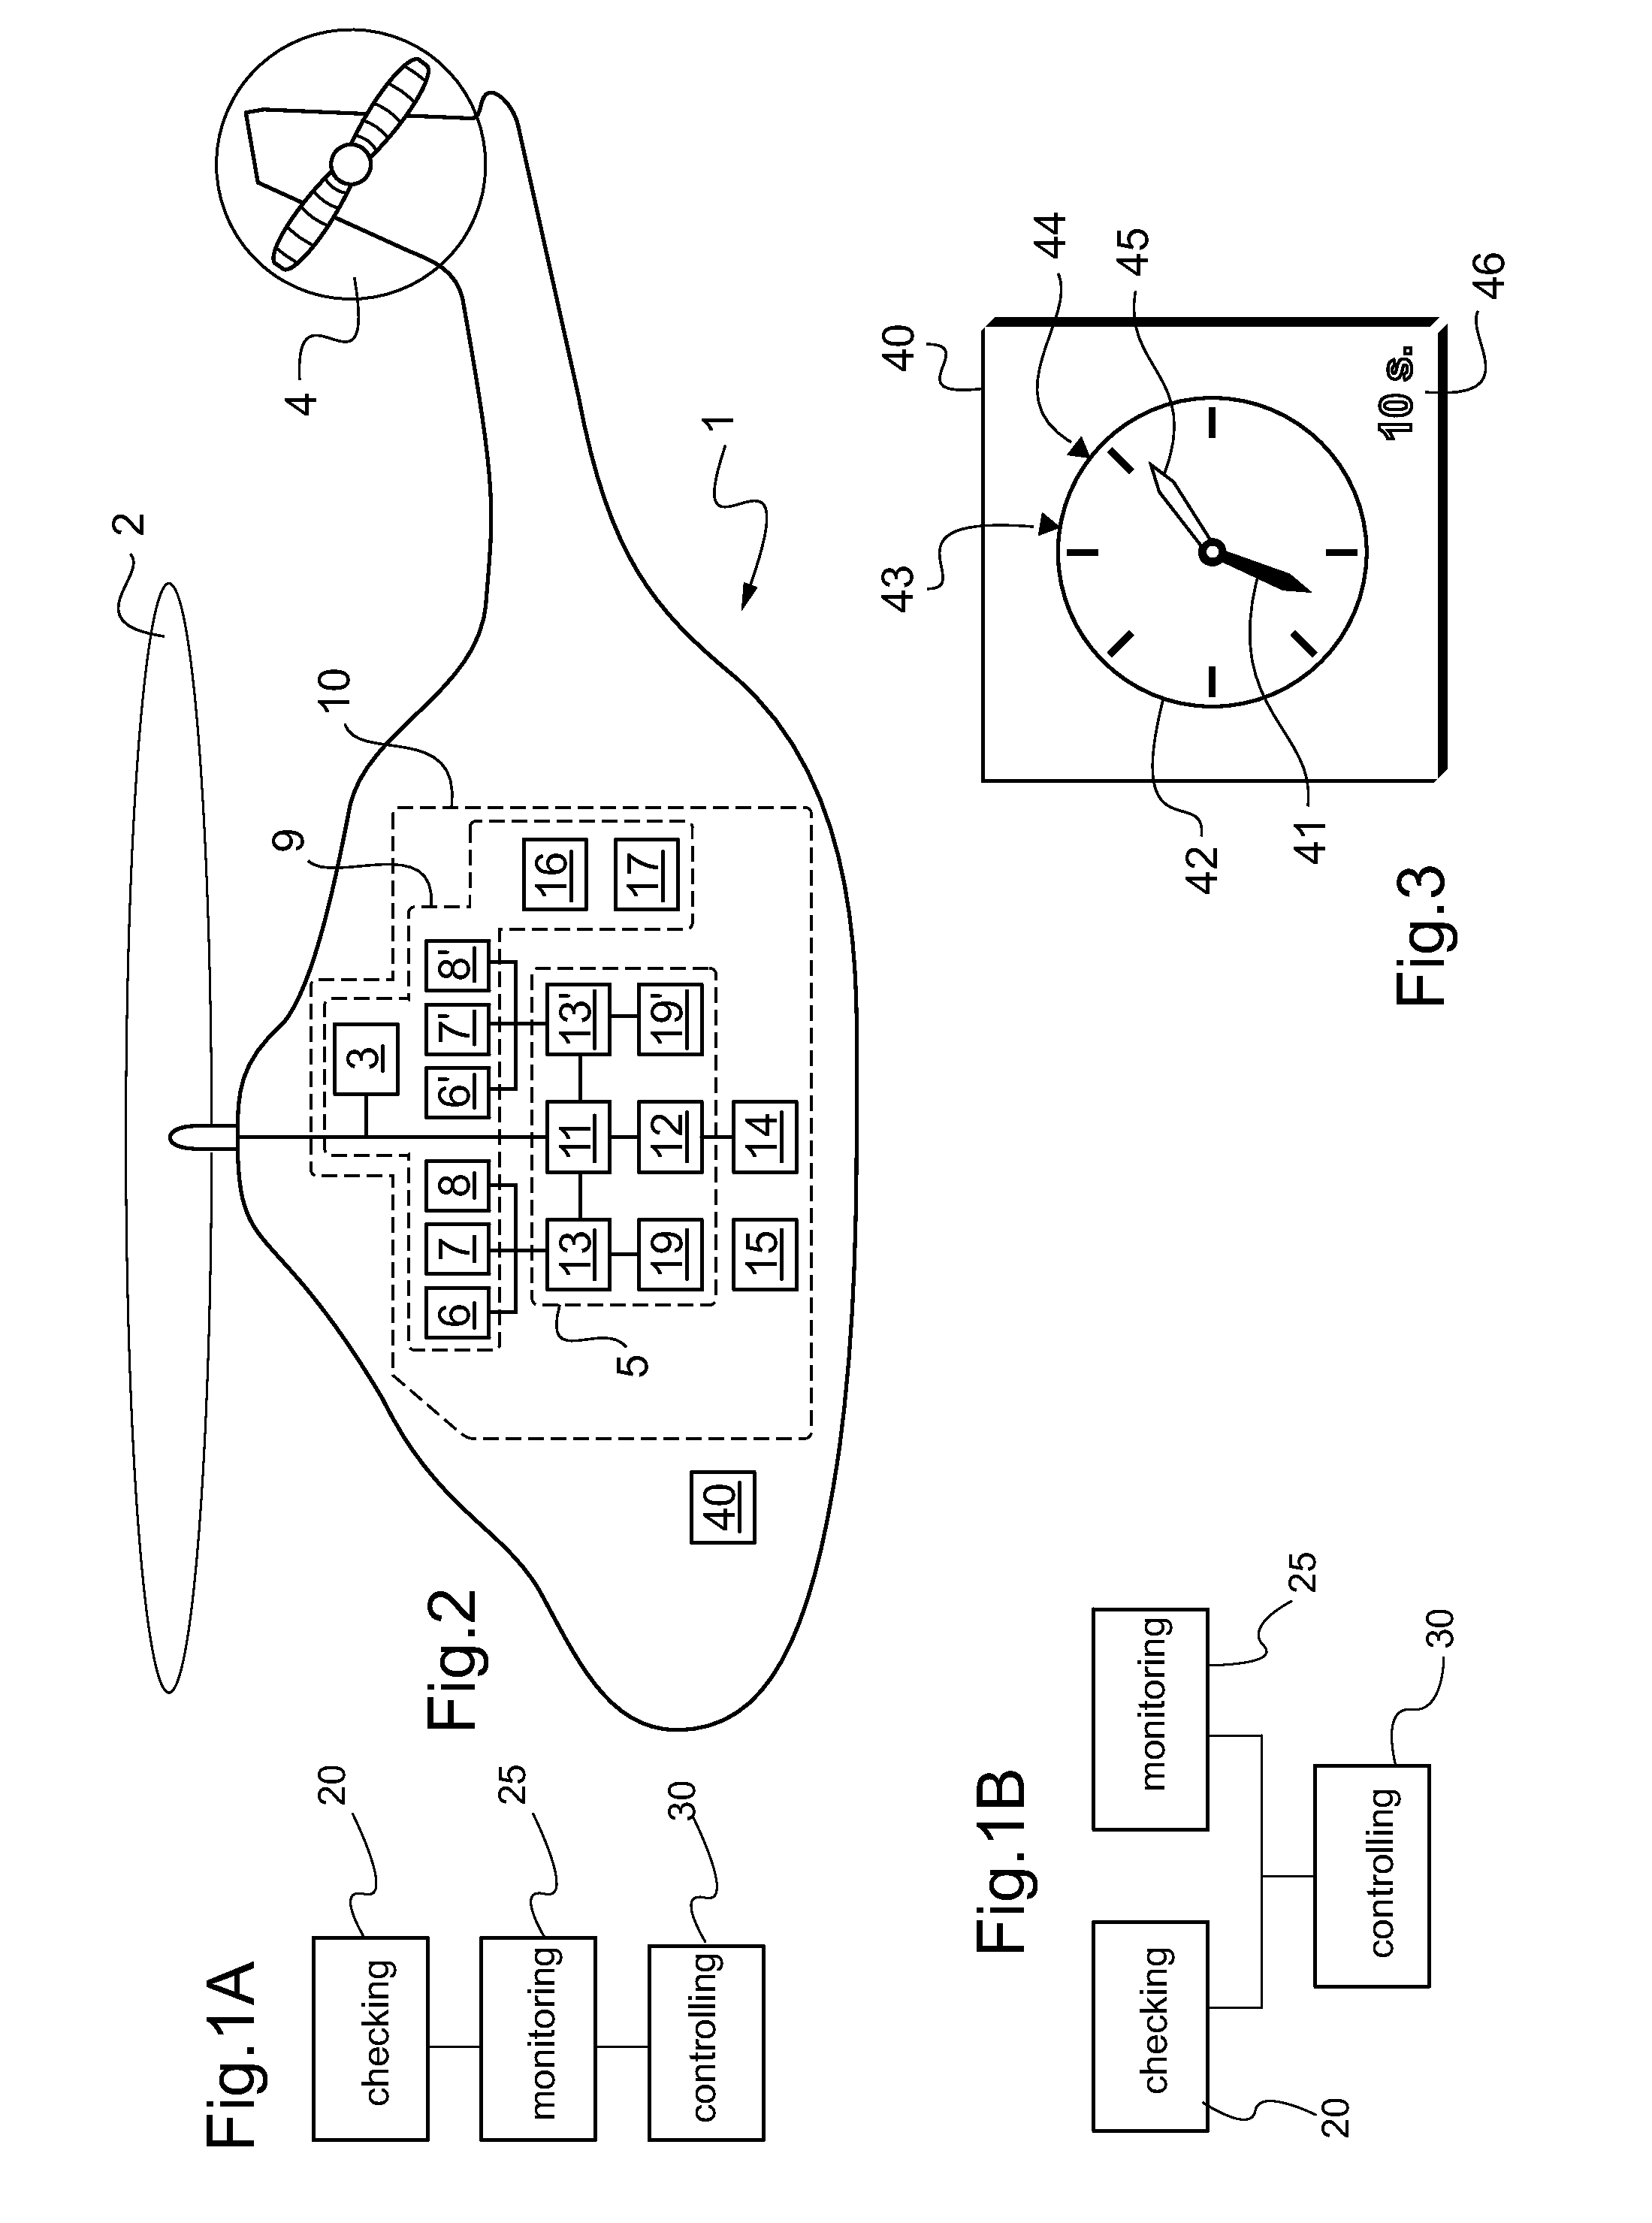 Method of managing an engine failure on a multi-engined aircraft having a hybrid power plant